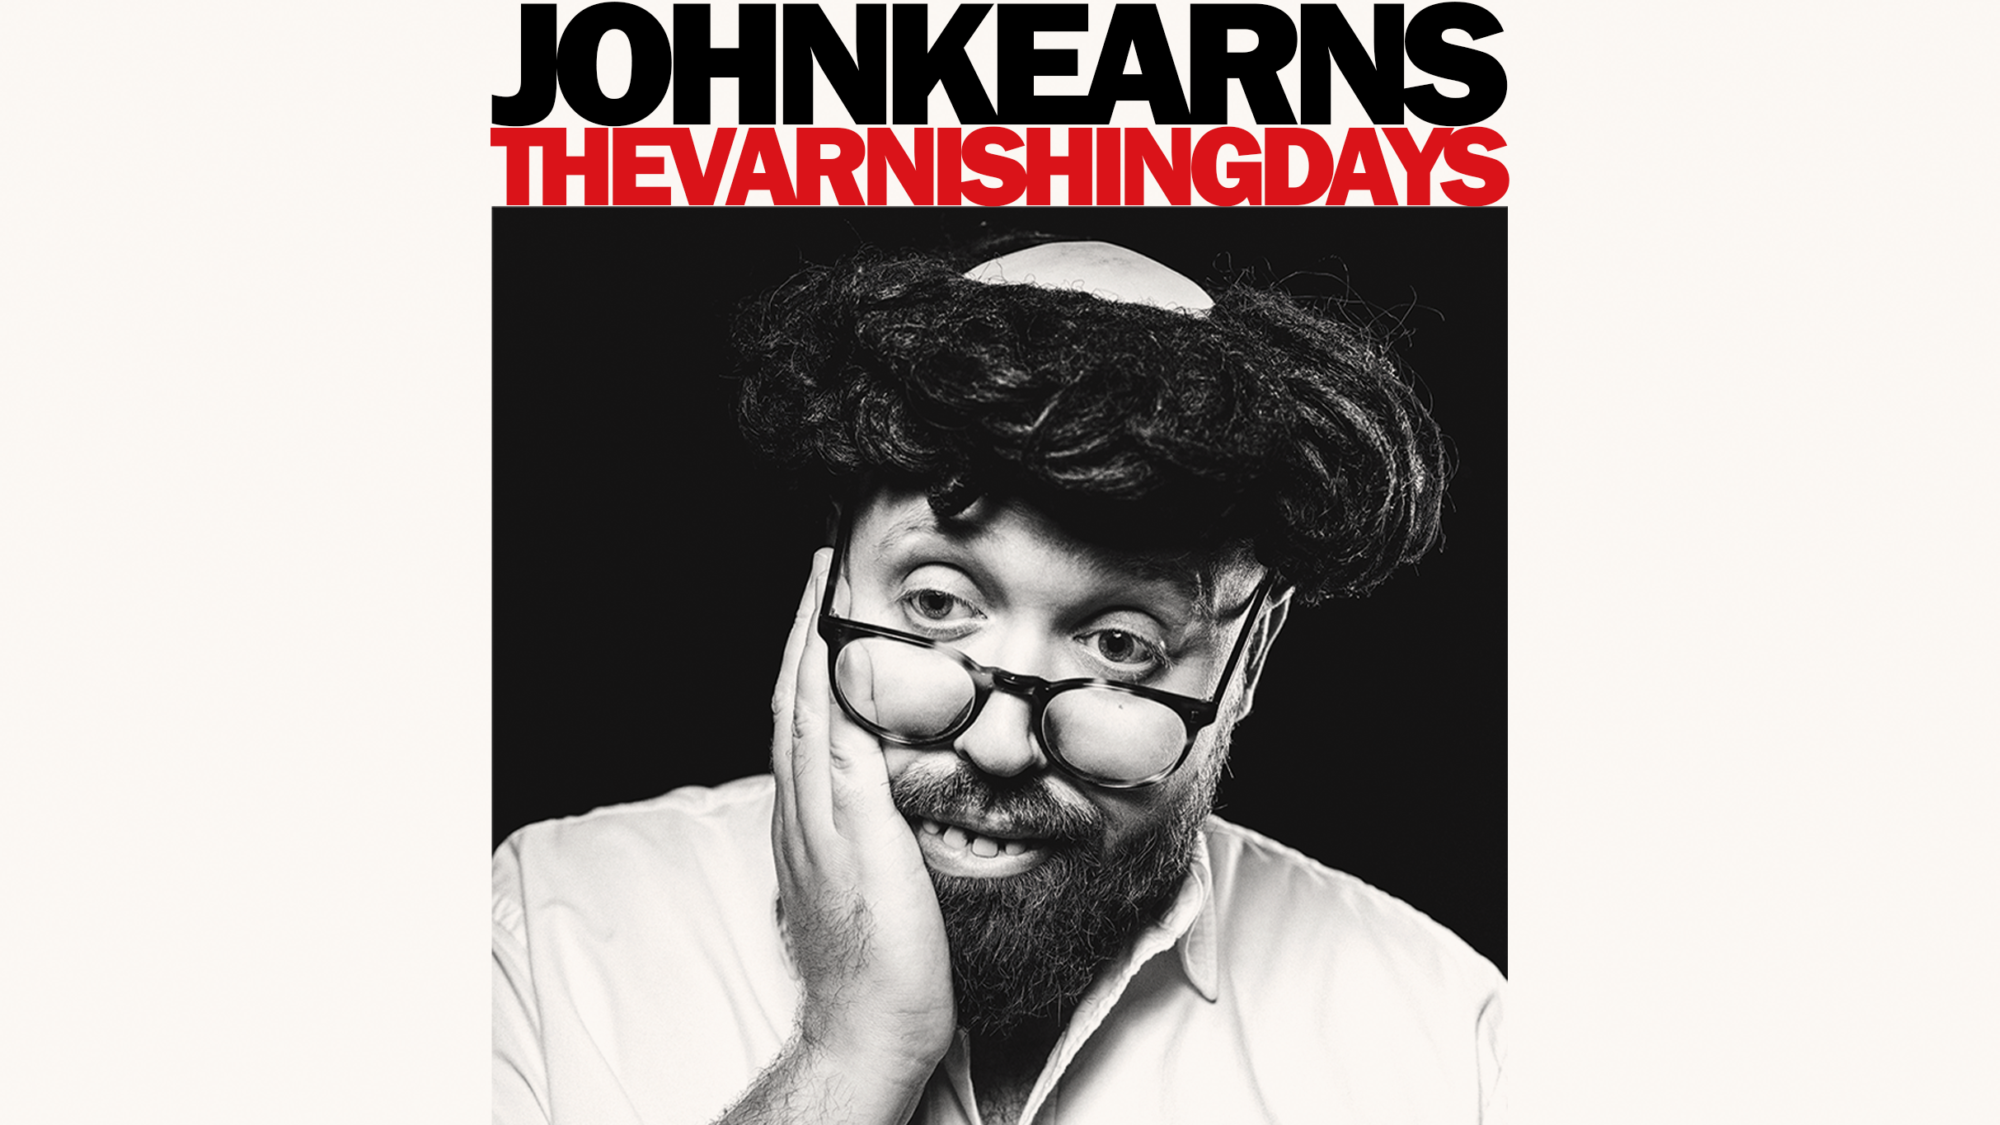 Image name John Kearns at Leadmill Sheffield the 1 image from the post John Kearns - The Vanishing Days at The Forum, Northallerton, Northallerton in Yorkshire.com.